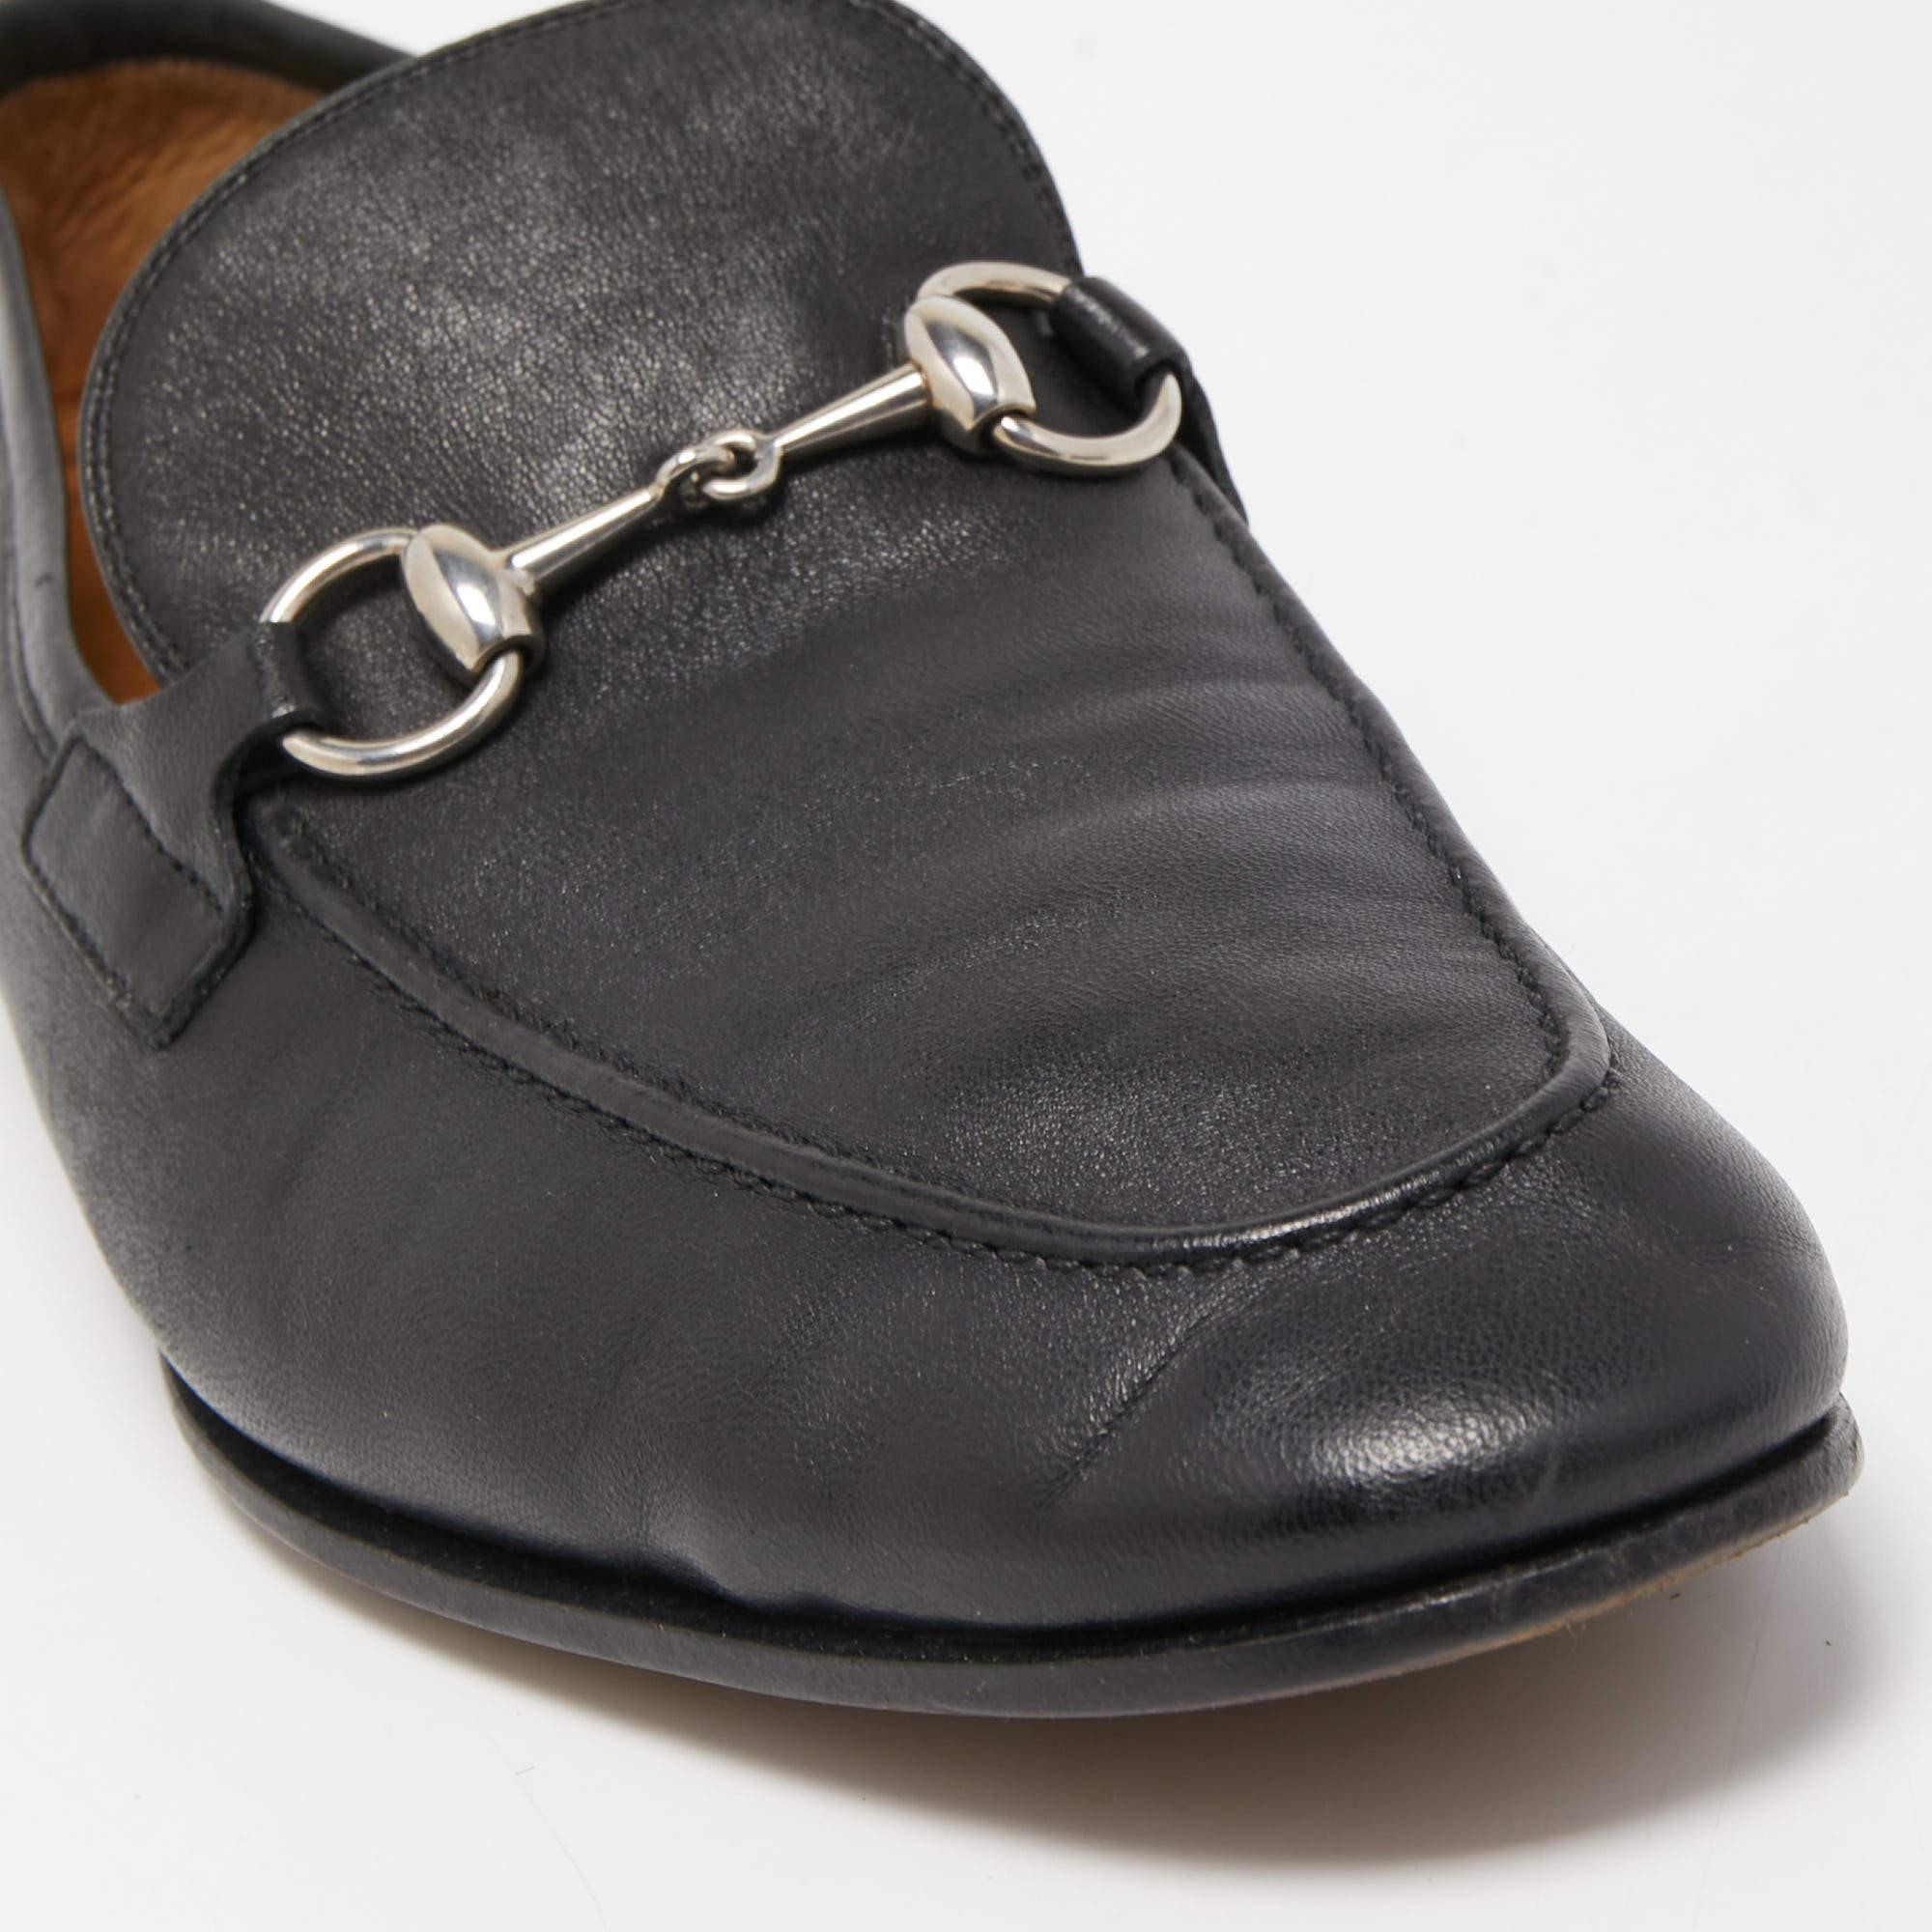 Gucci Black Leather Jordaan Loafers Size 40.5 2